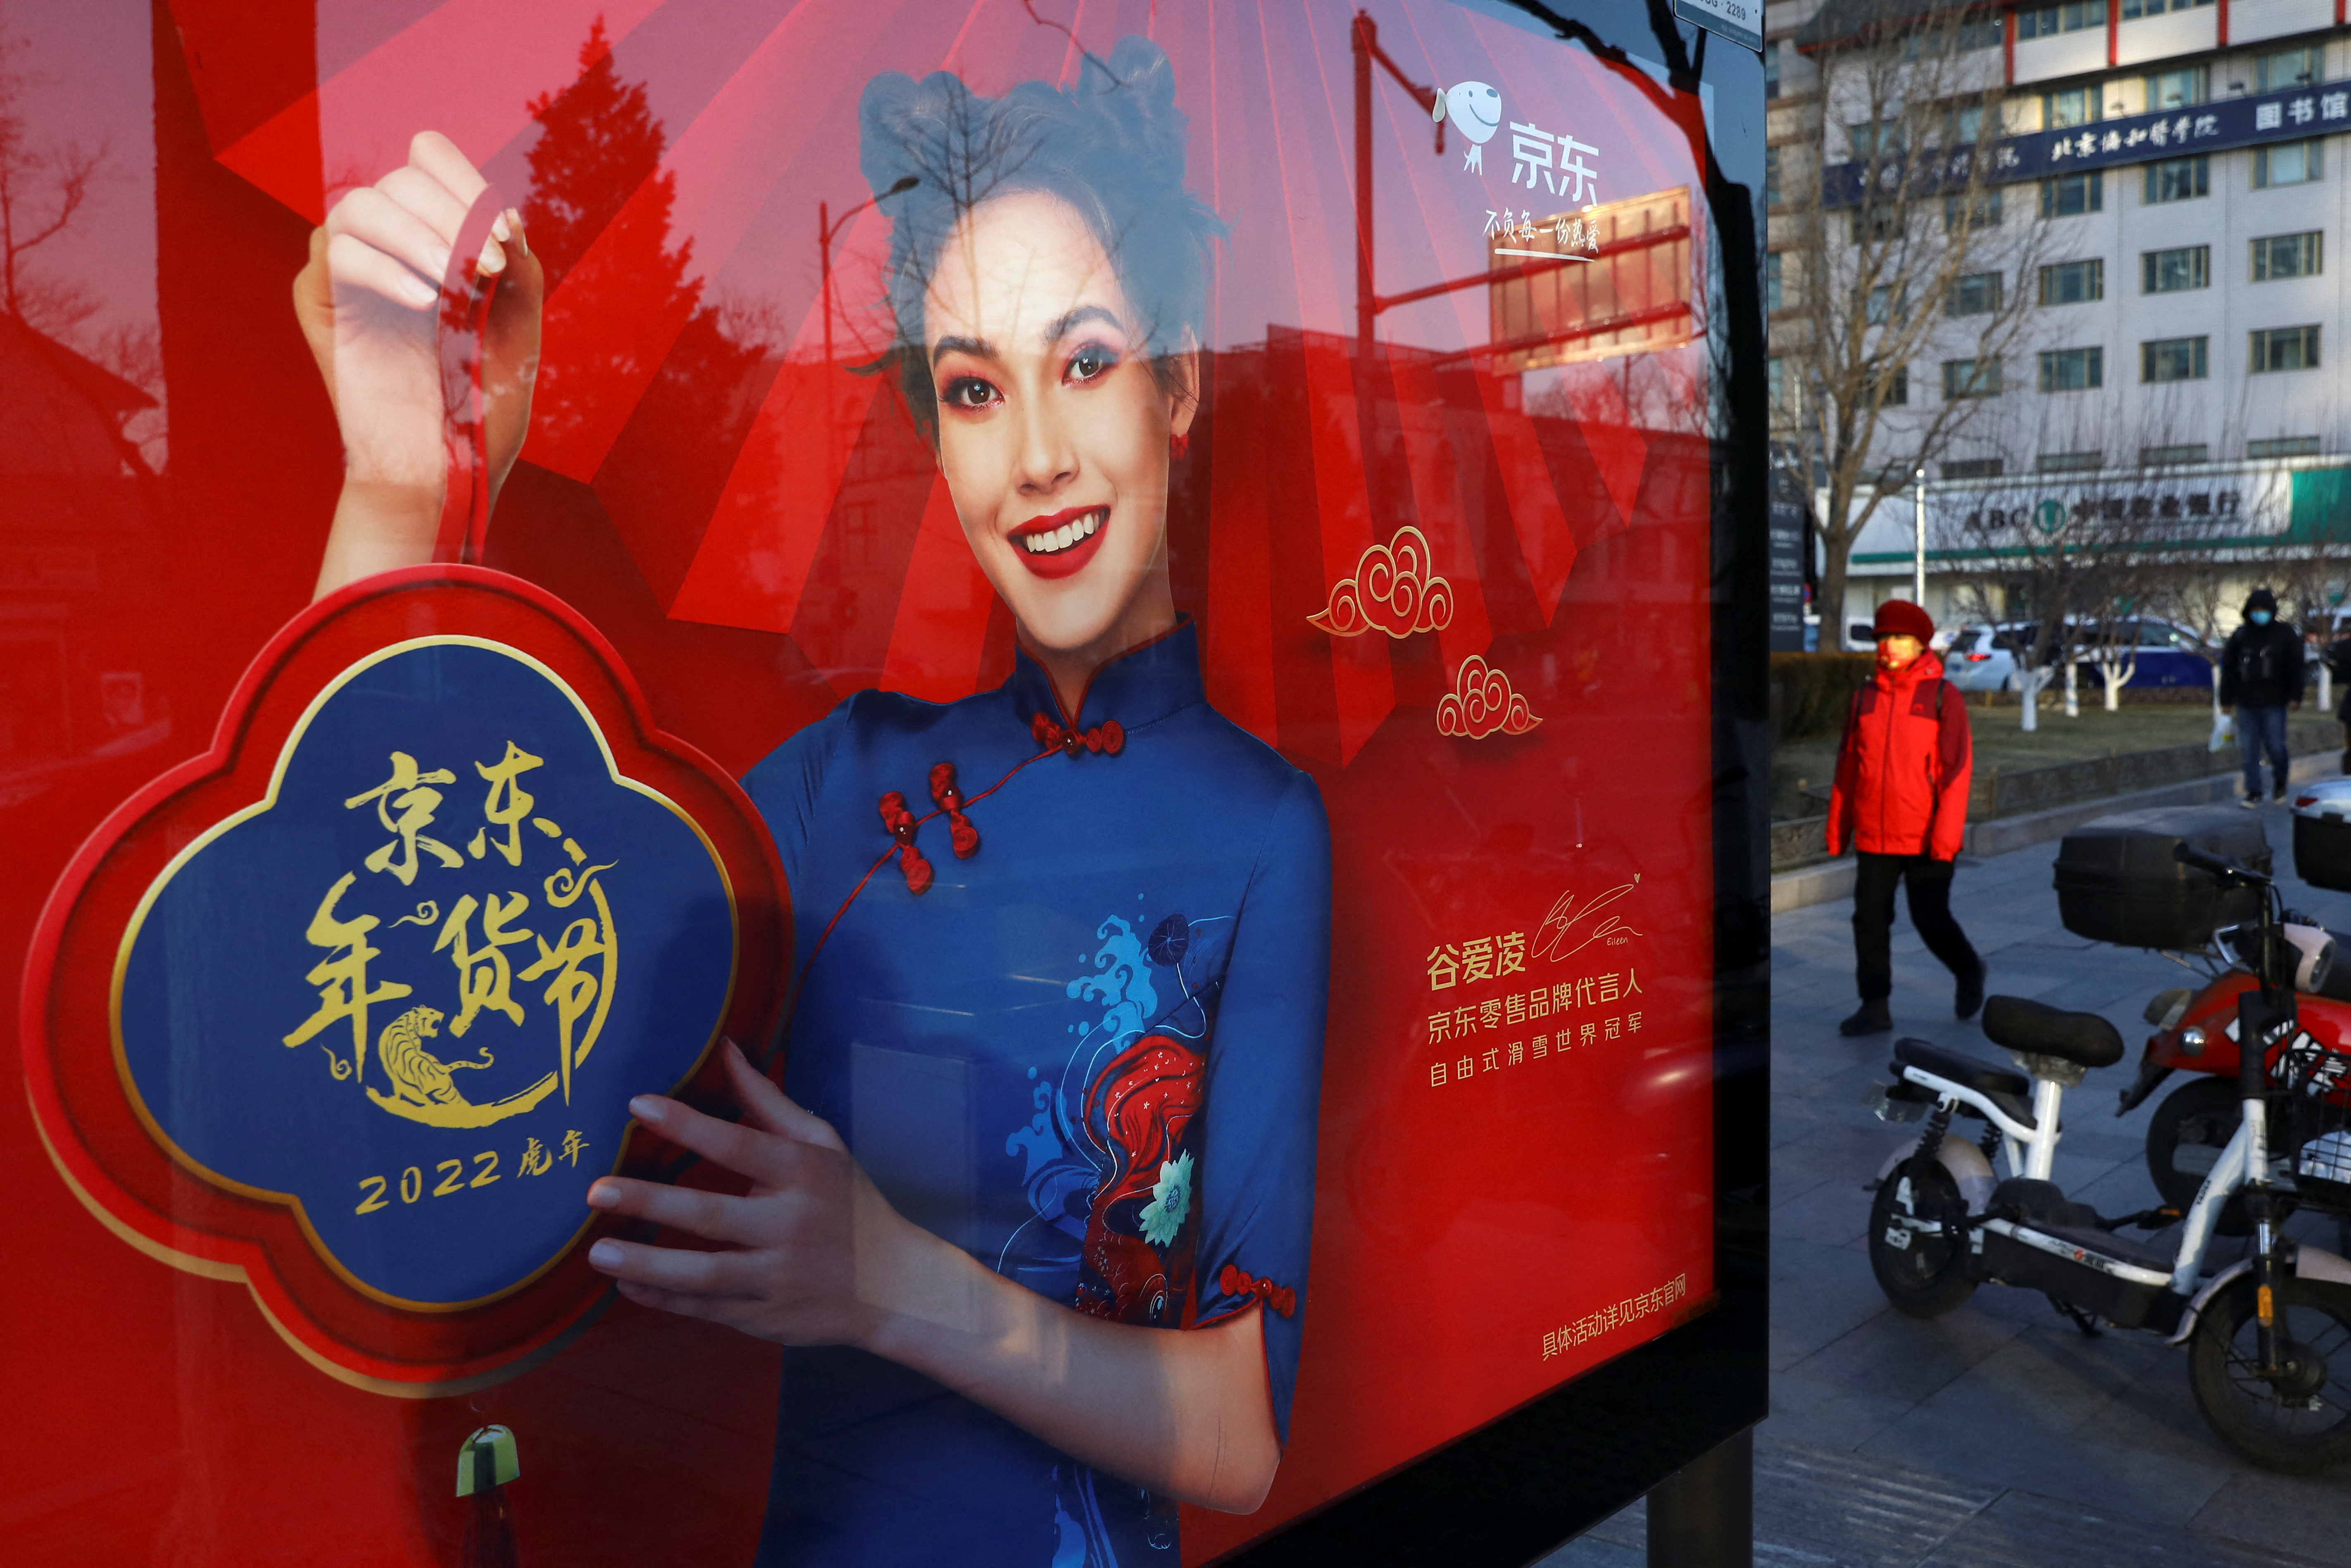 Advertisement with an image of Eileen Gu is seen at a bus stop in Beijing